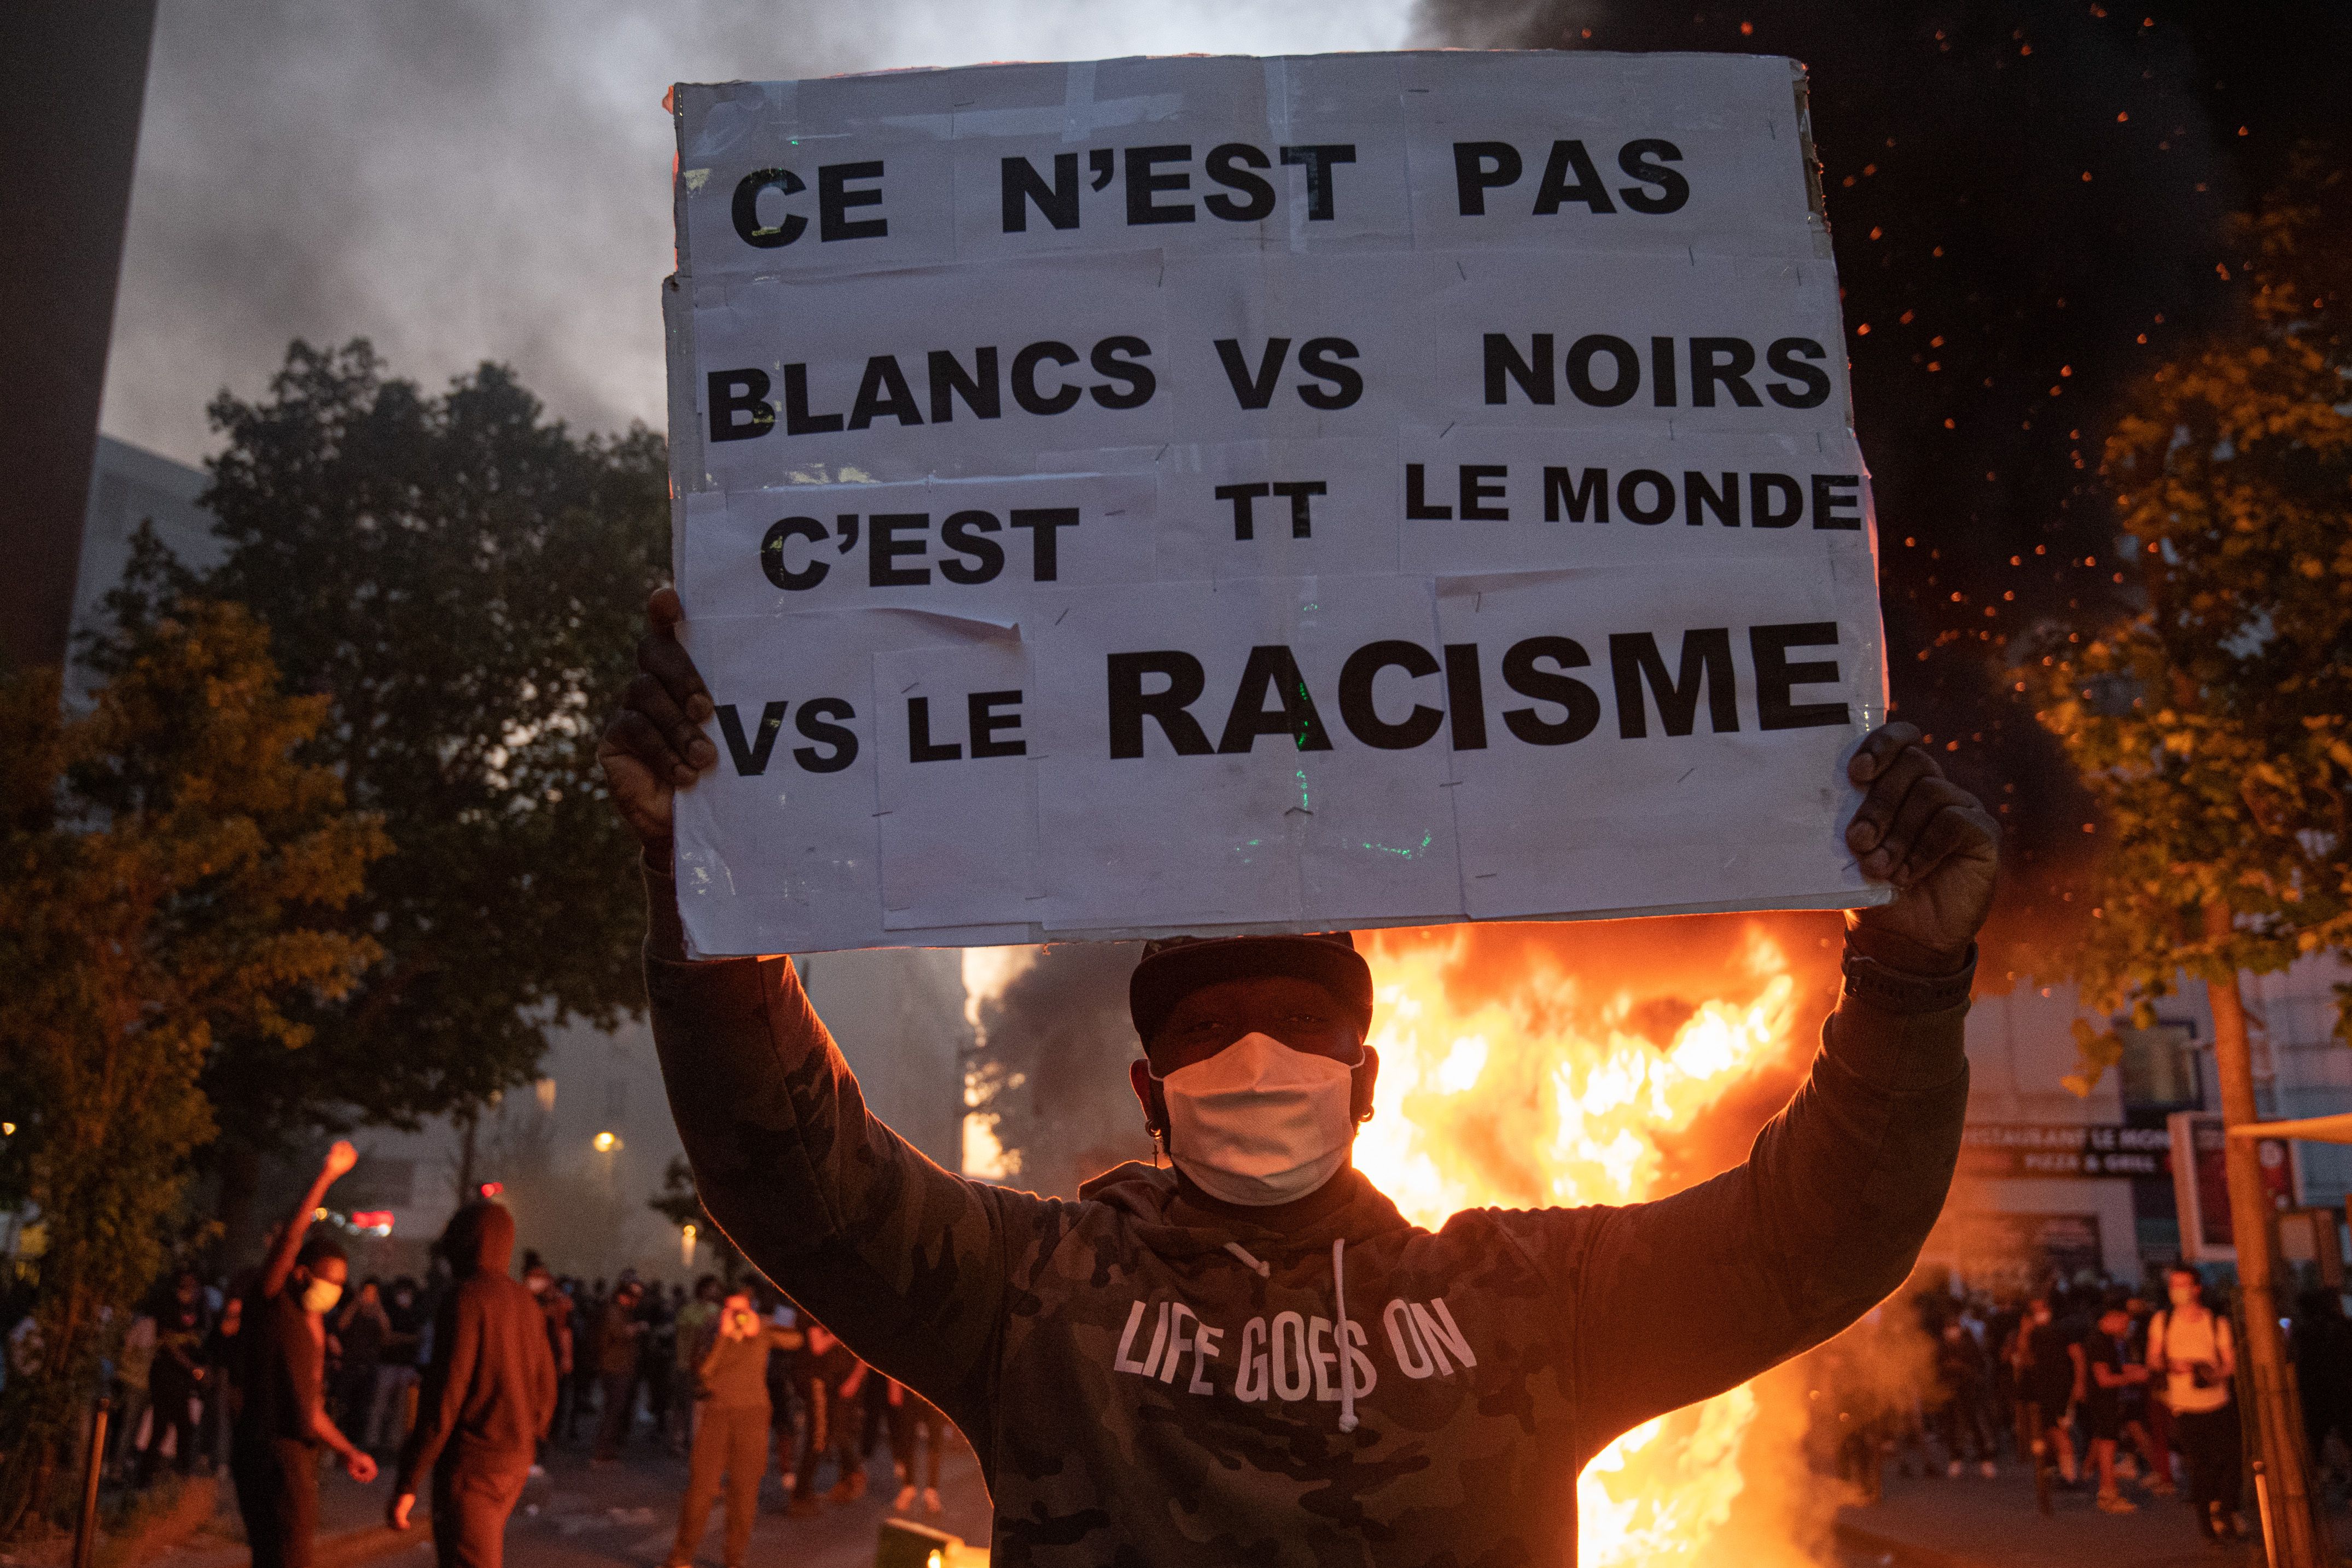 A burning barricade following the intervention of security forces in a protest against police brutality at the "Tribunal de Paris" courthouse on June 2, 2020 in Paris, France.